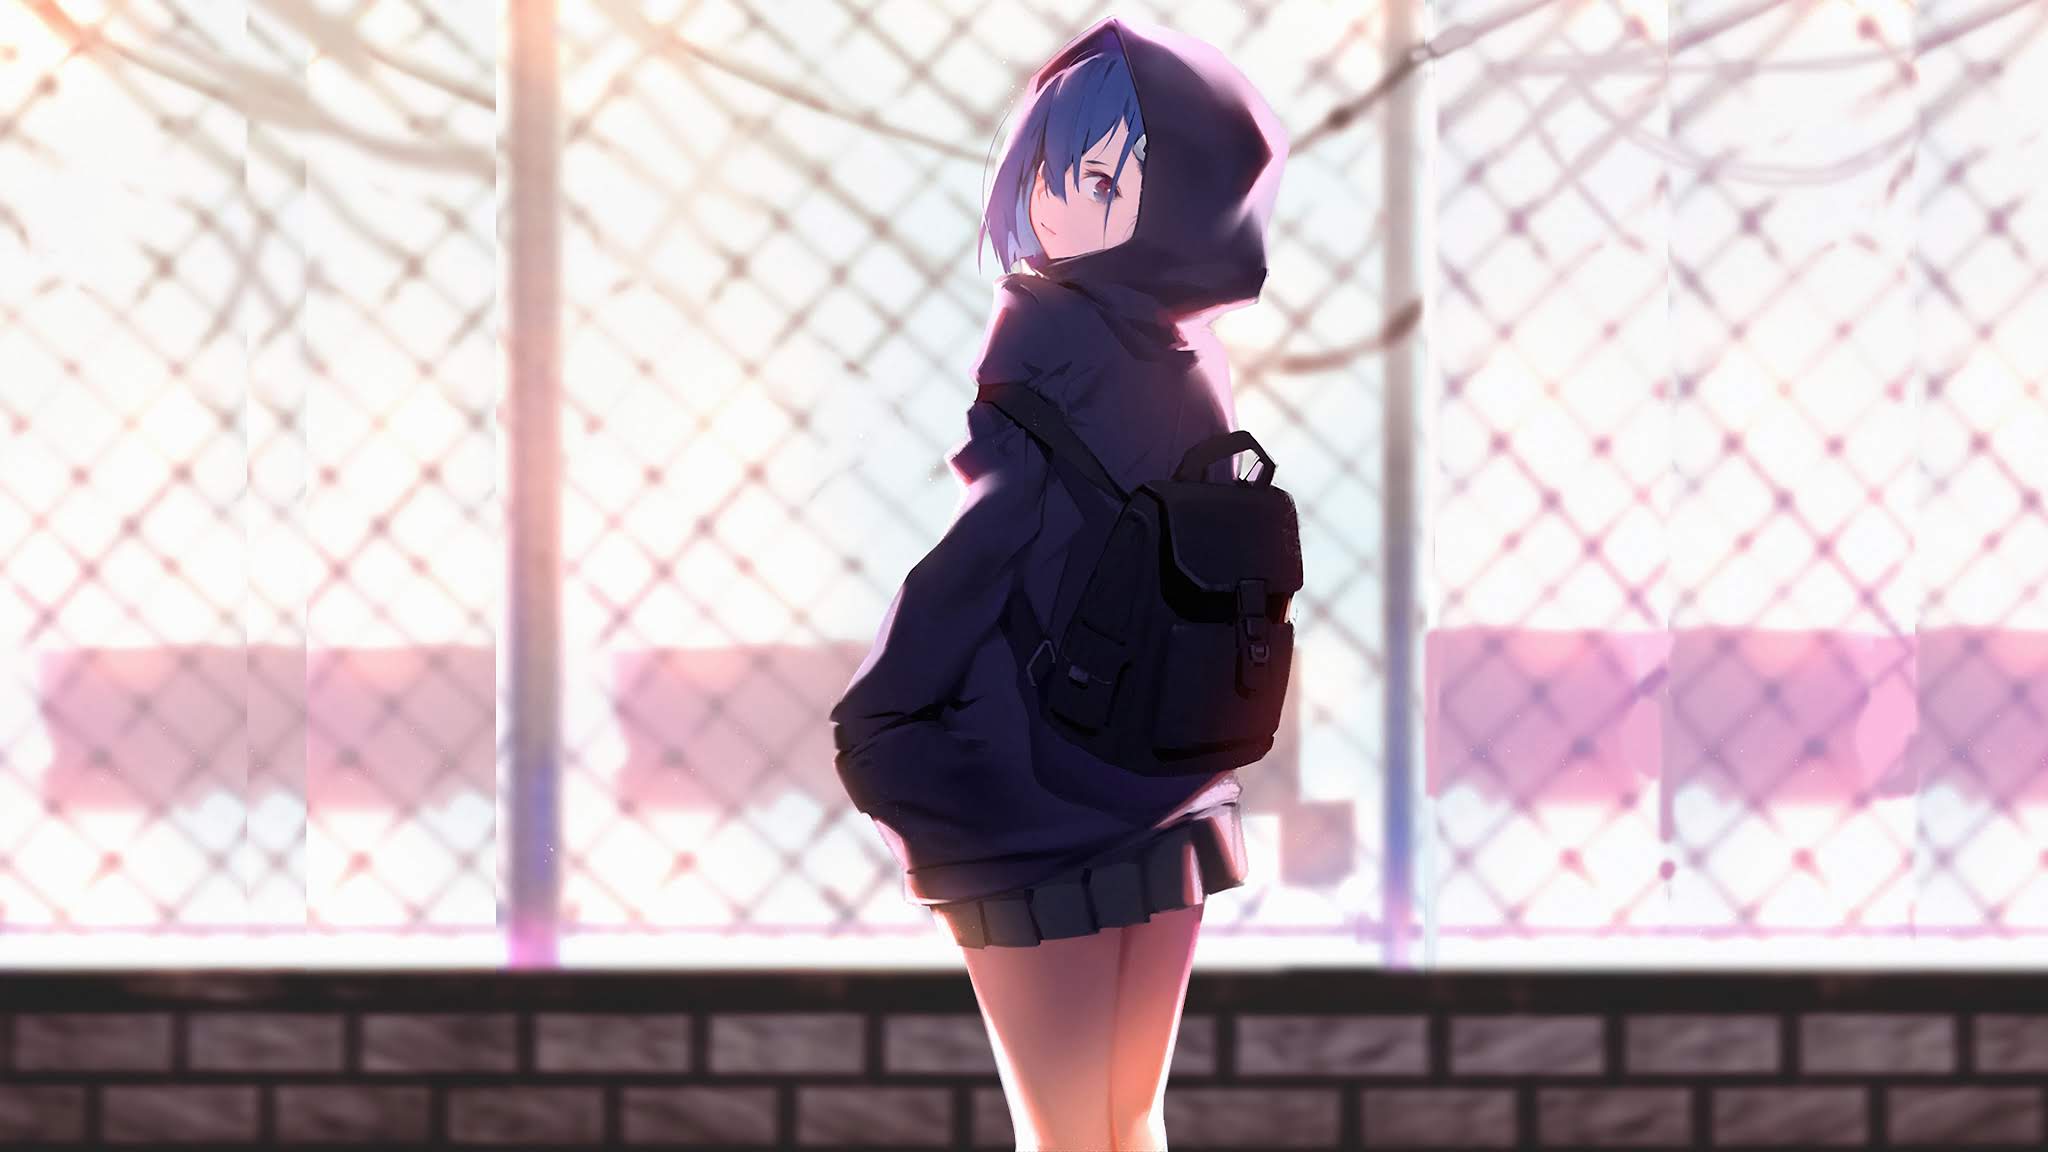 Anime Girls With Hoodies Wallpapers - Wallpaper Cave